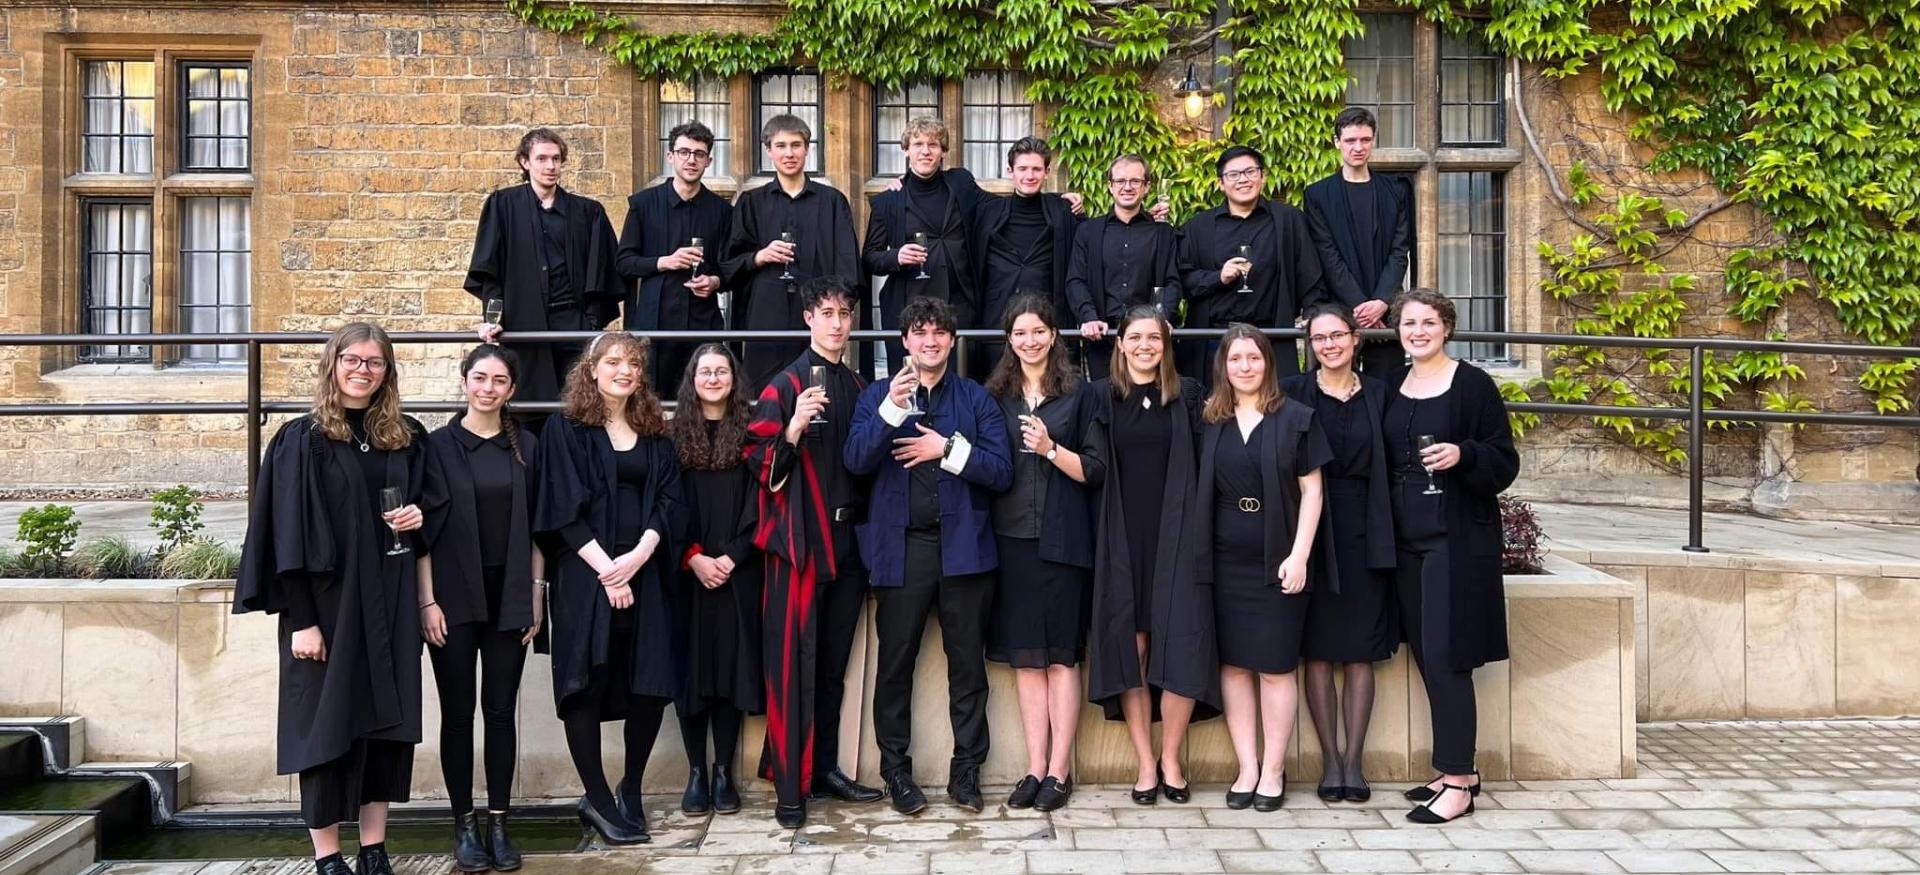 The Trinity College chapel choir pose in the library quad of Trinity colege in gowns.